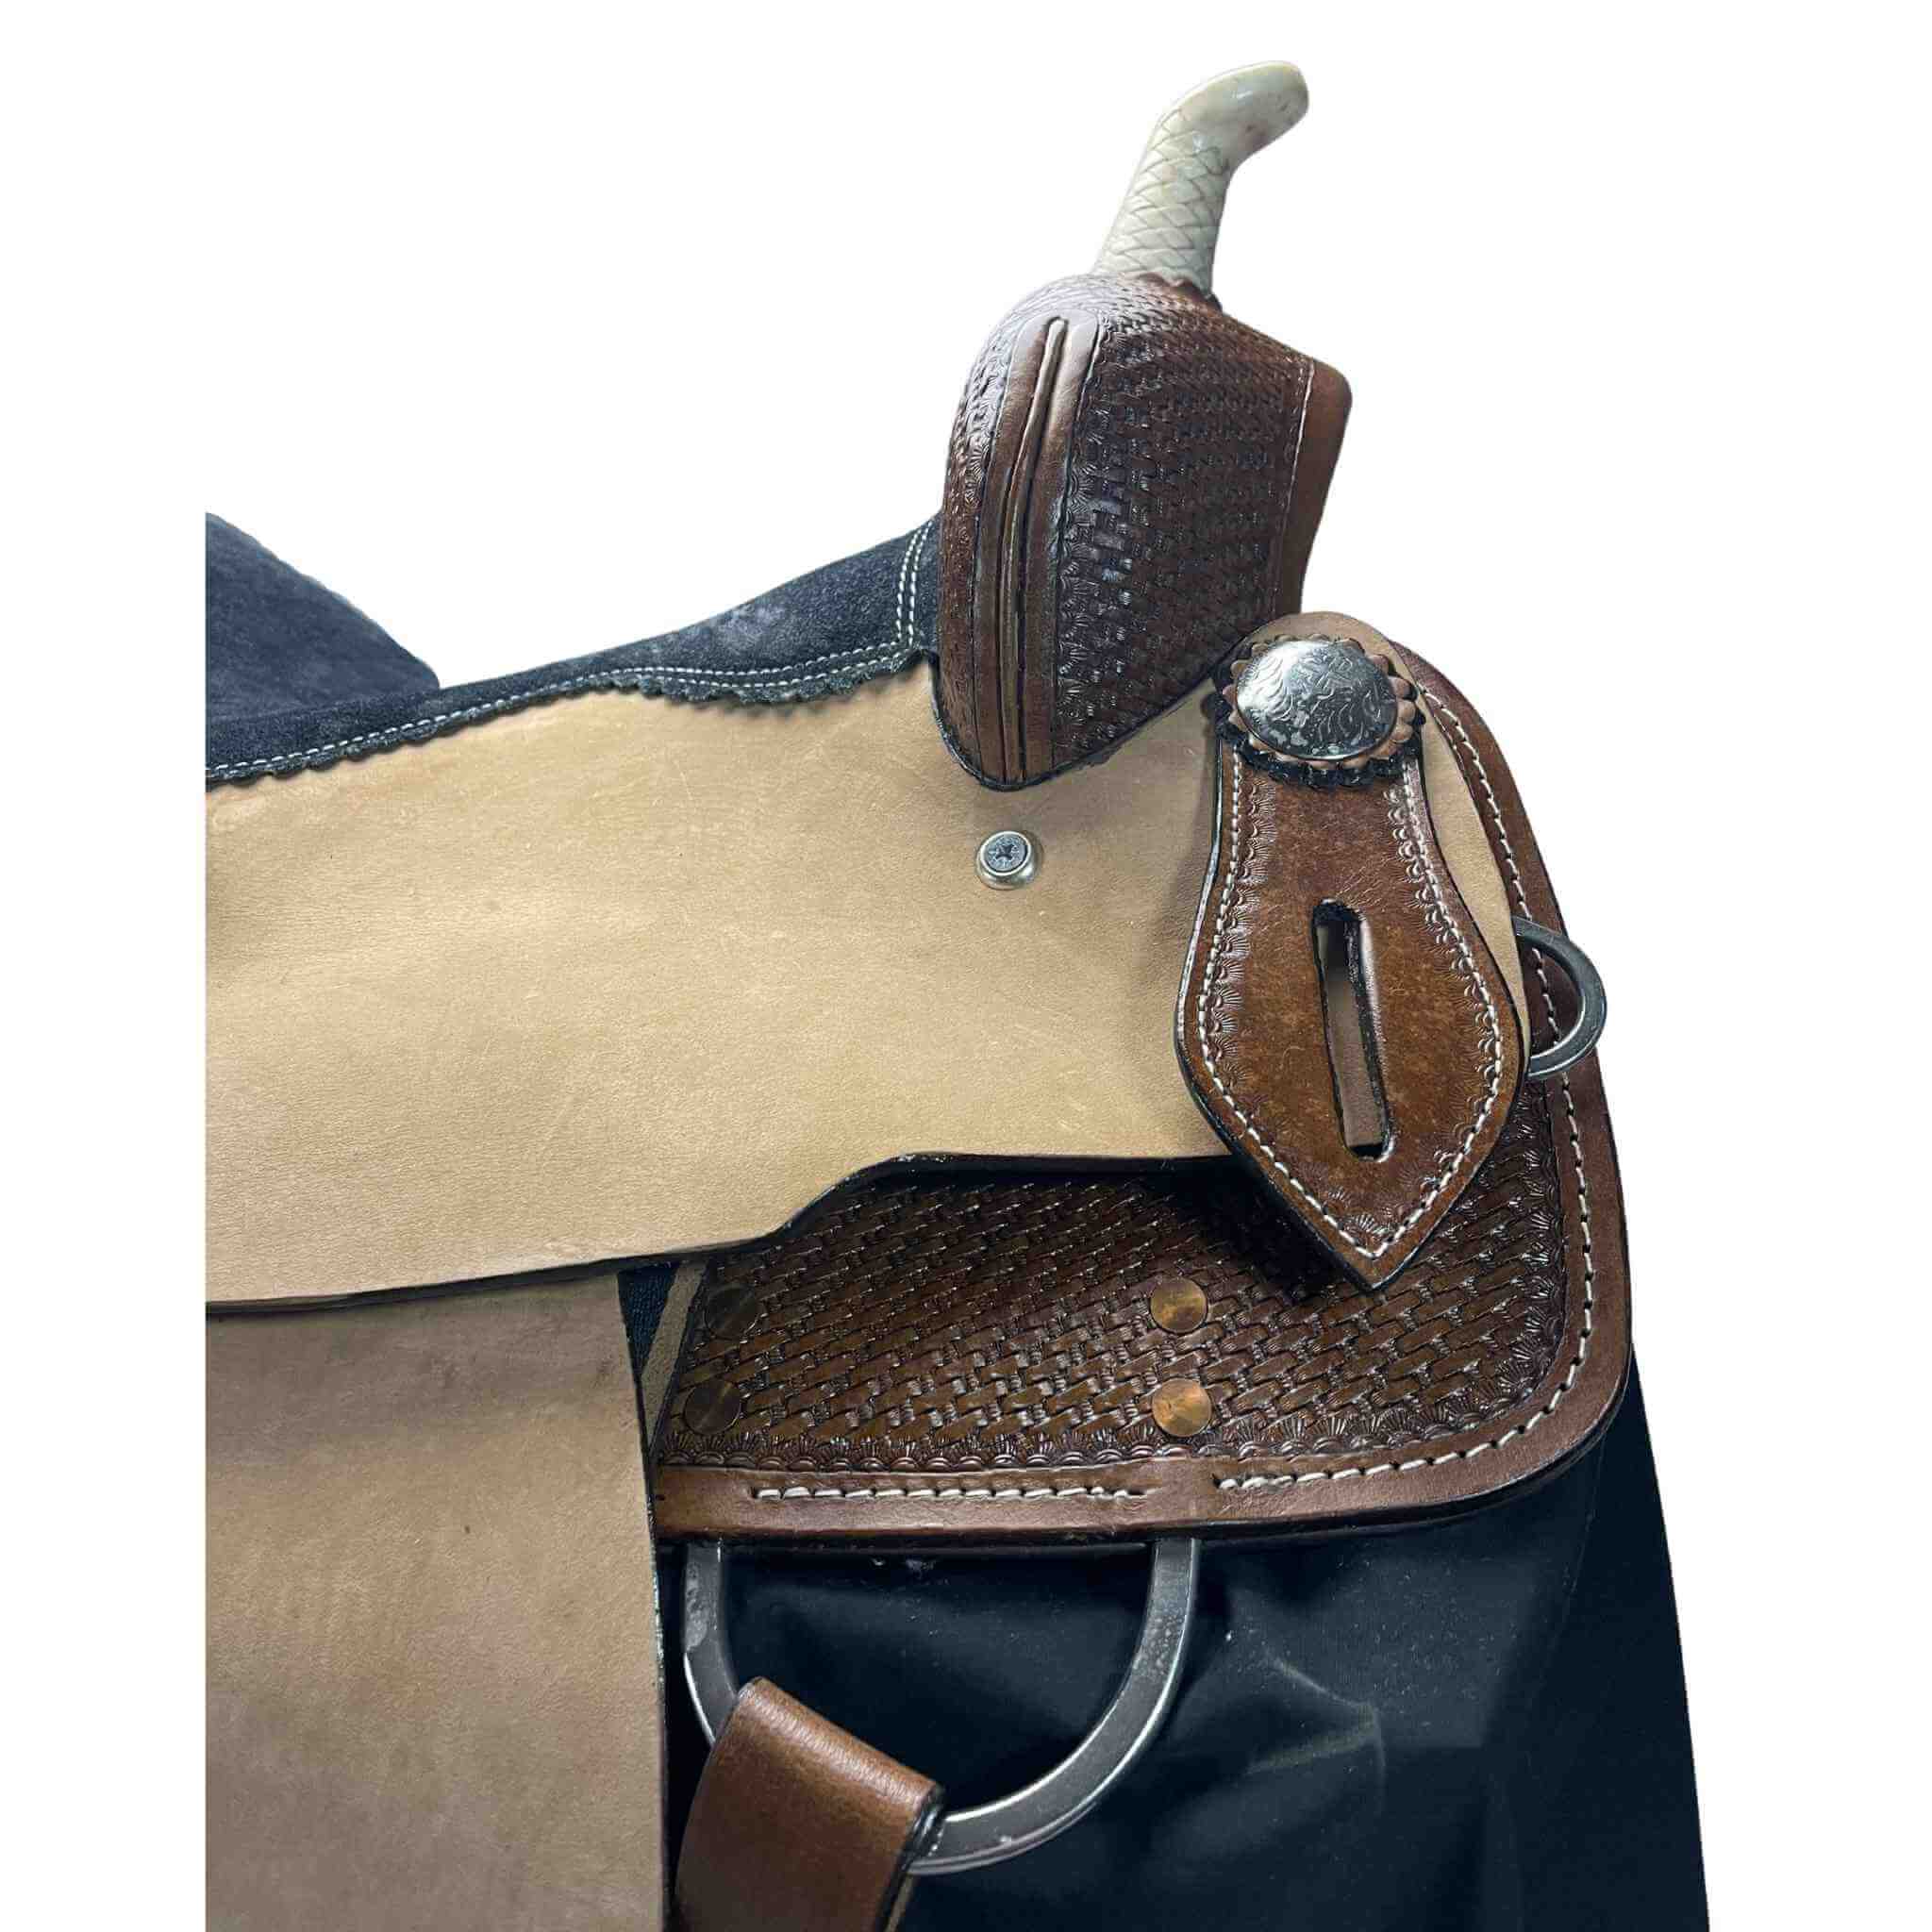 Double T Barrel Saddle W/ Matching Headstall & Breast Collar 7654 Saddle Set Double T   